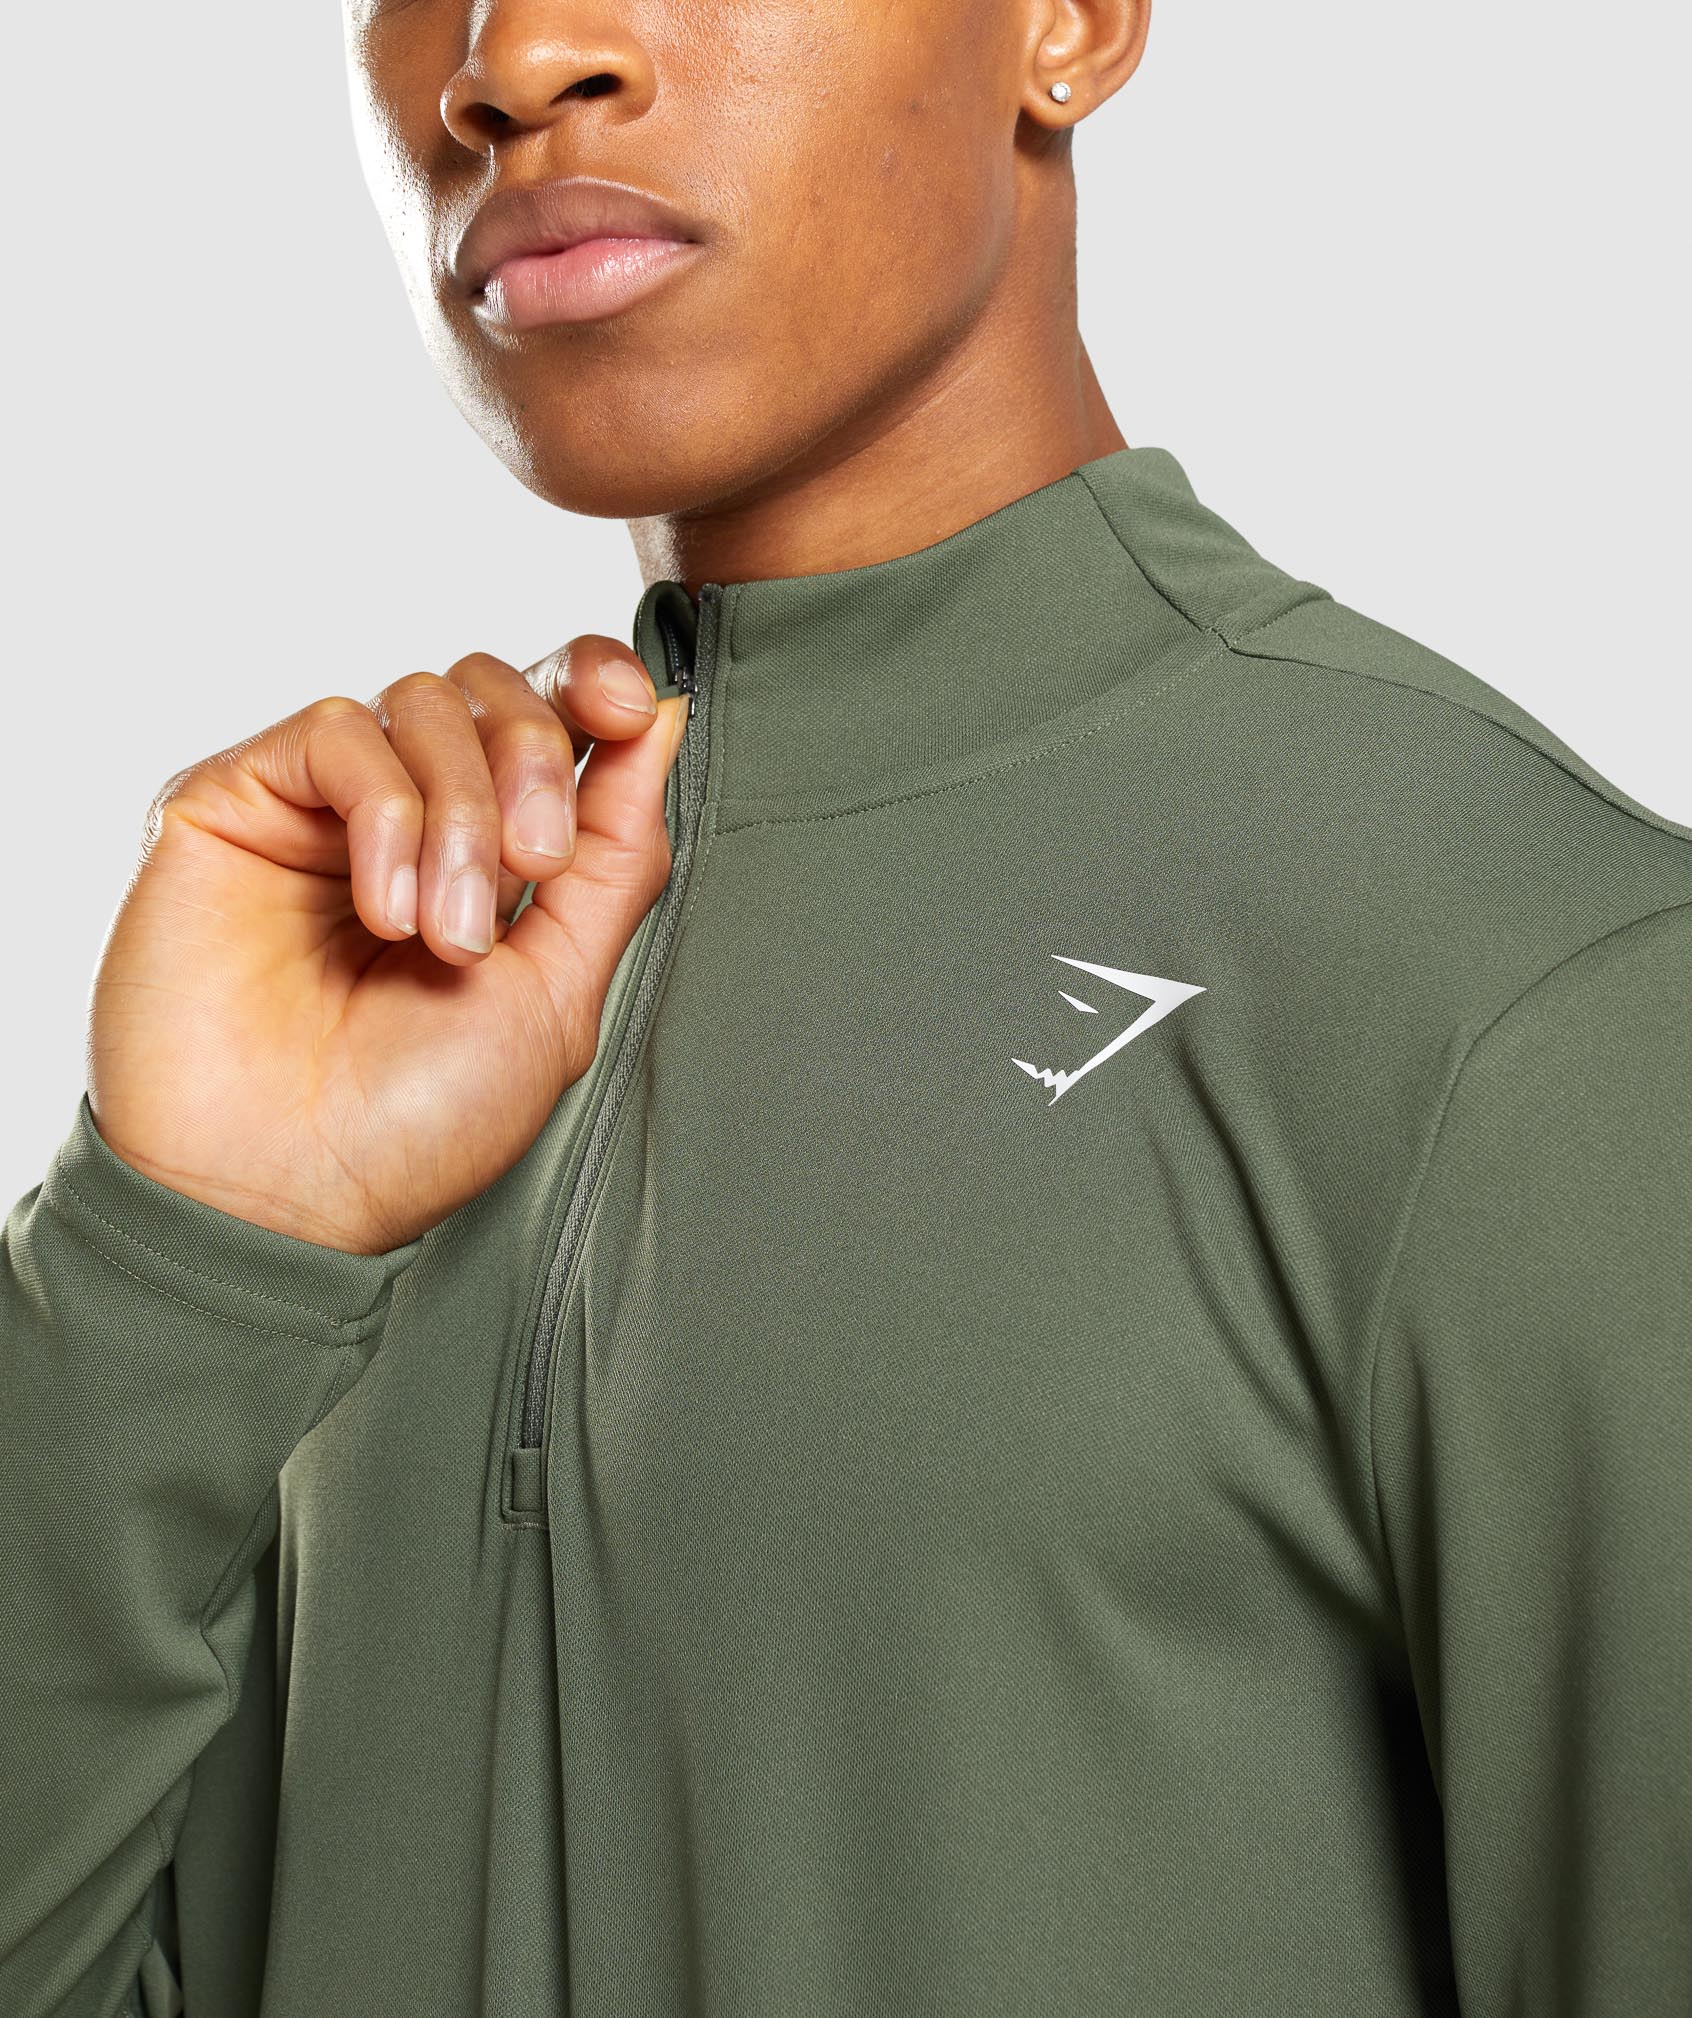 Arrival 1/4 Zip Pullover in Core Olive - view 5